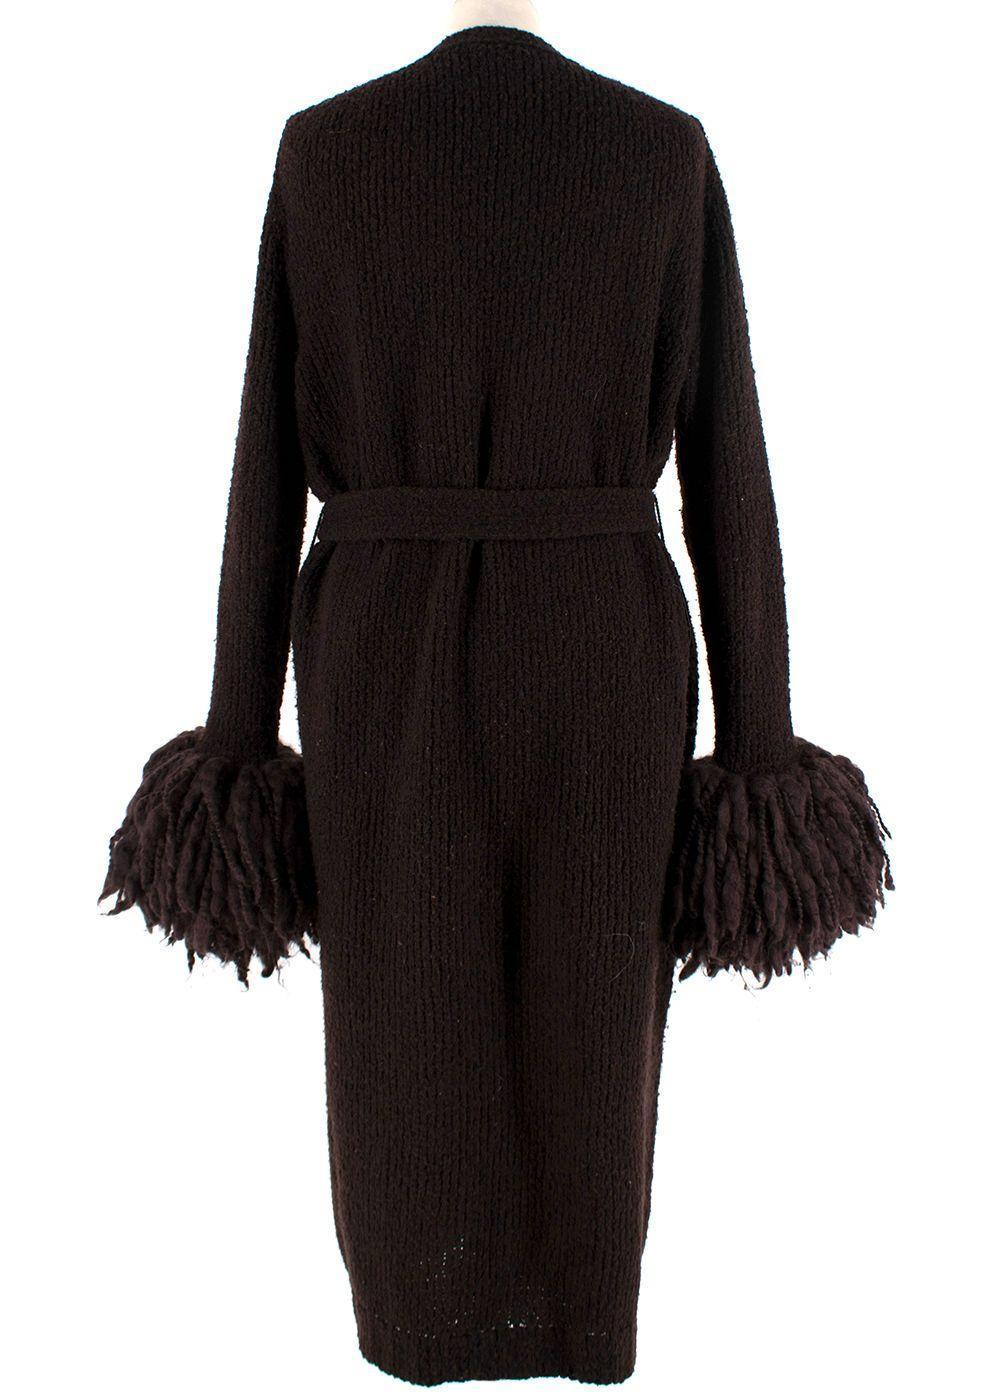 Bottega Veneta Chocolate Brown Boucle Wool Fringed Sleeve Cardigan-Coat

- Runway piece RTW AW 18
- Soft wool longline belted cardigan-coat
-Fringed mohair trim at the cuffs
-Ribbed trim at the hem and pockets
-Relaxed silhouette
-Unlined and